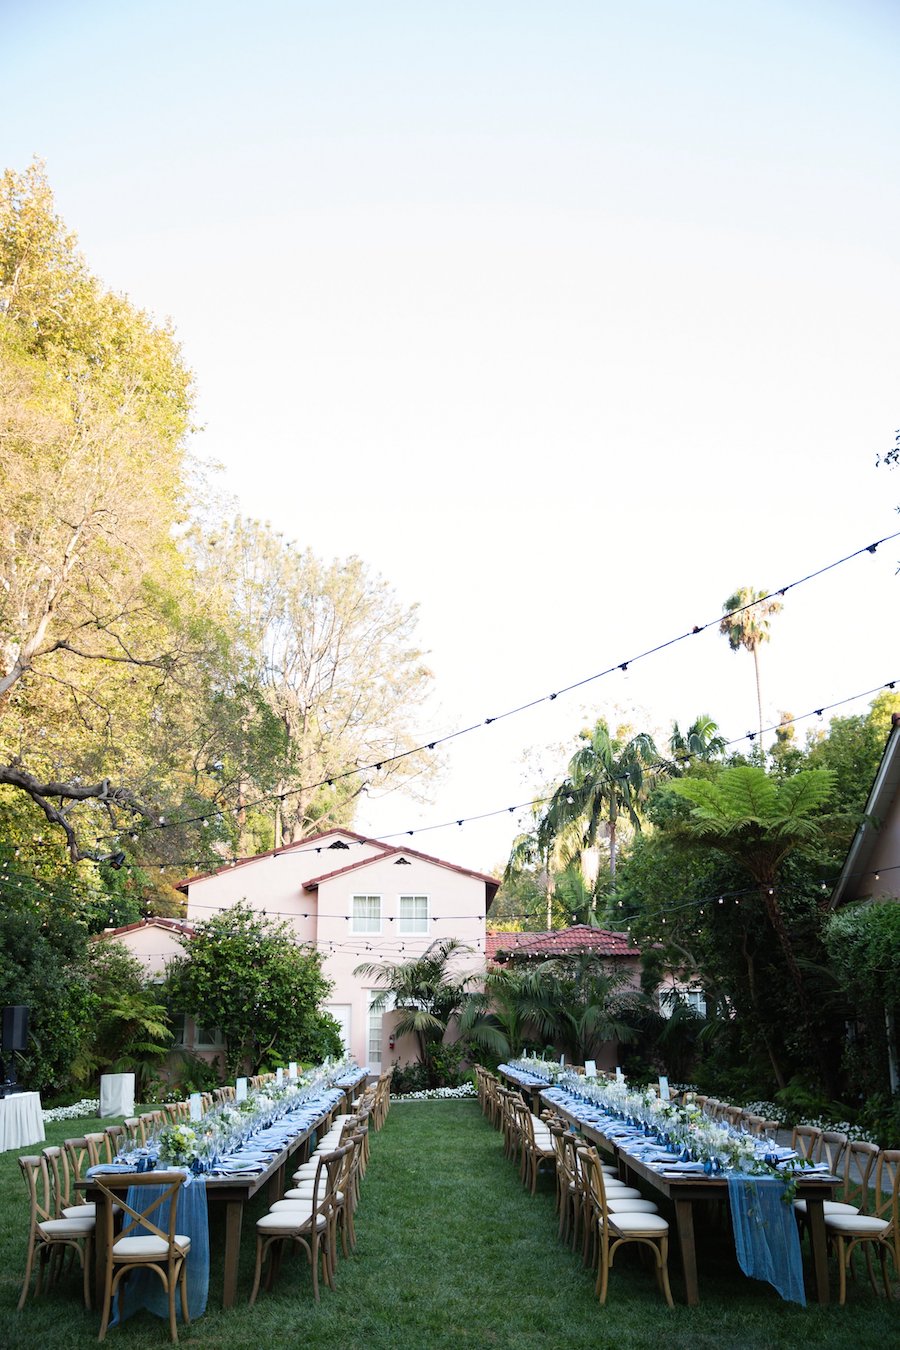 Hotel Bel Air wedding, blue Wedding, Outdoor Wedding, The Lighter Side, Hotel Bel Air, Max and Friends, Siren floral co, Minted, Found Vintage Rentals, Borrowed BLU, The Lighter Side